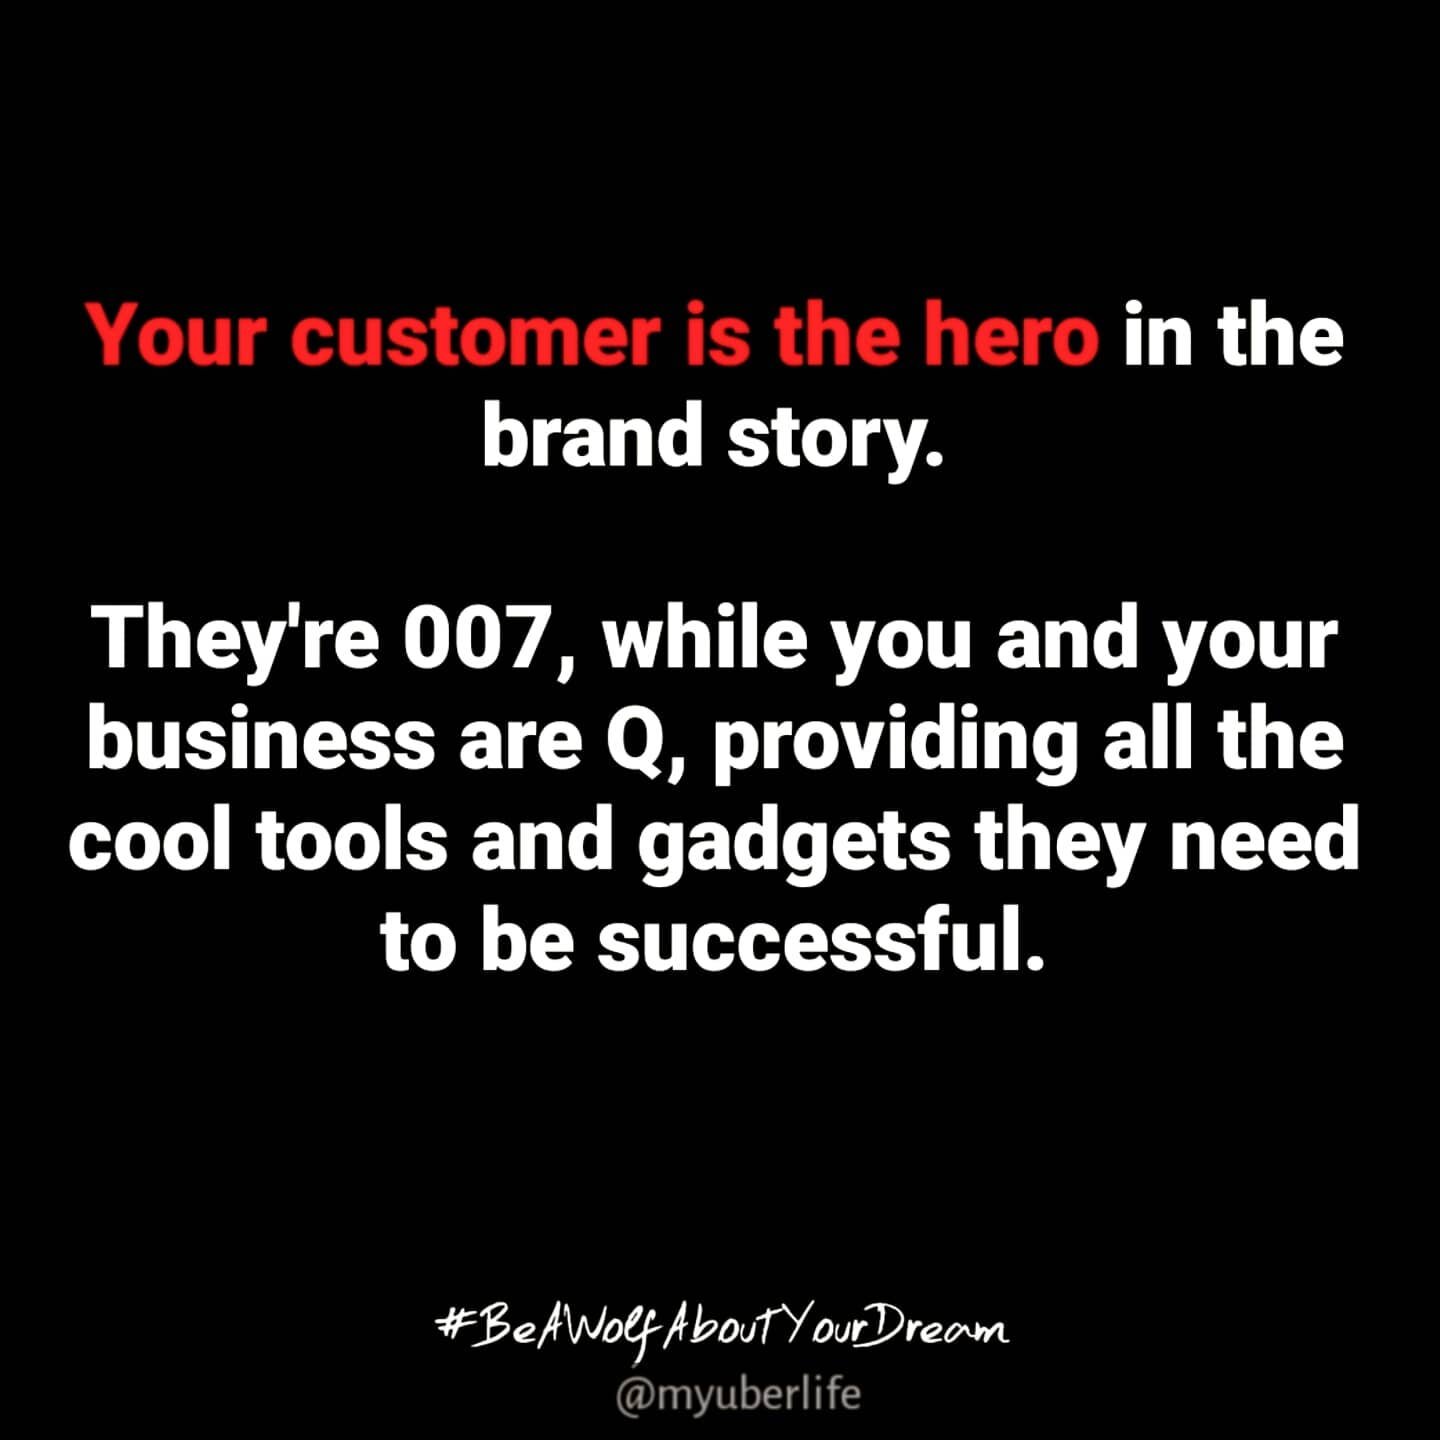 Your customer/client is always the star of the story. Whatever brand narrative you put out there, make sure it centers around the customer - your business is subordinate to them.
-
Be a W&Uuml;LF about your dream.
-
#MULFMAB
#MYUBERLIFE 
#leadership 